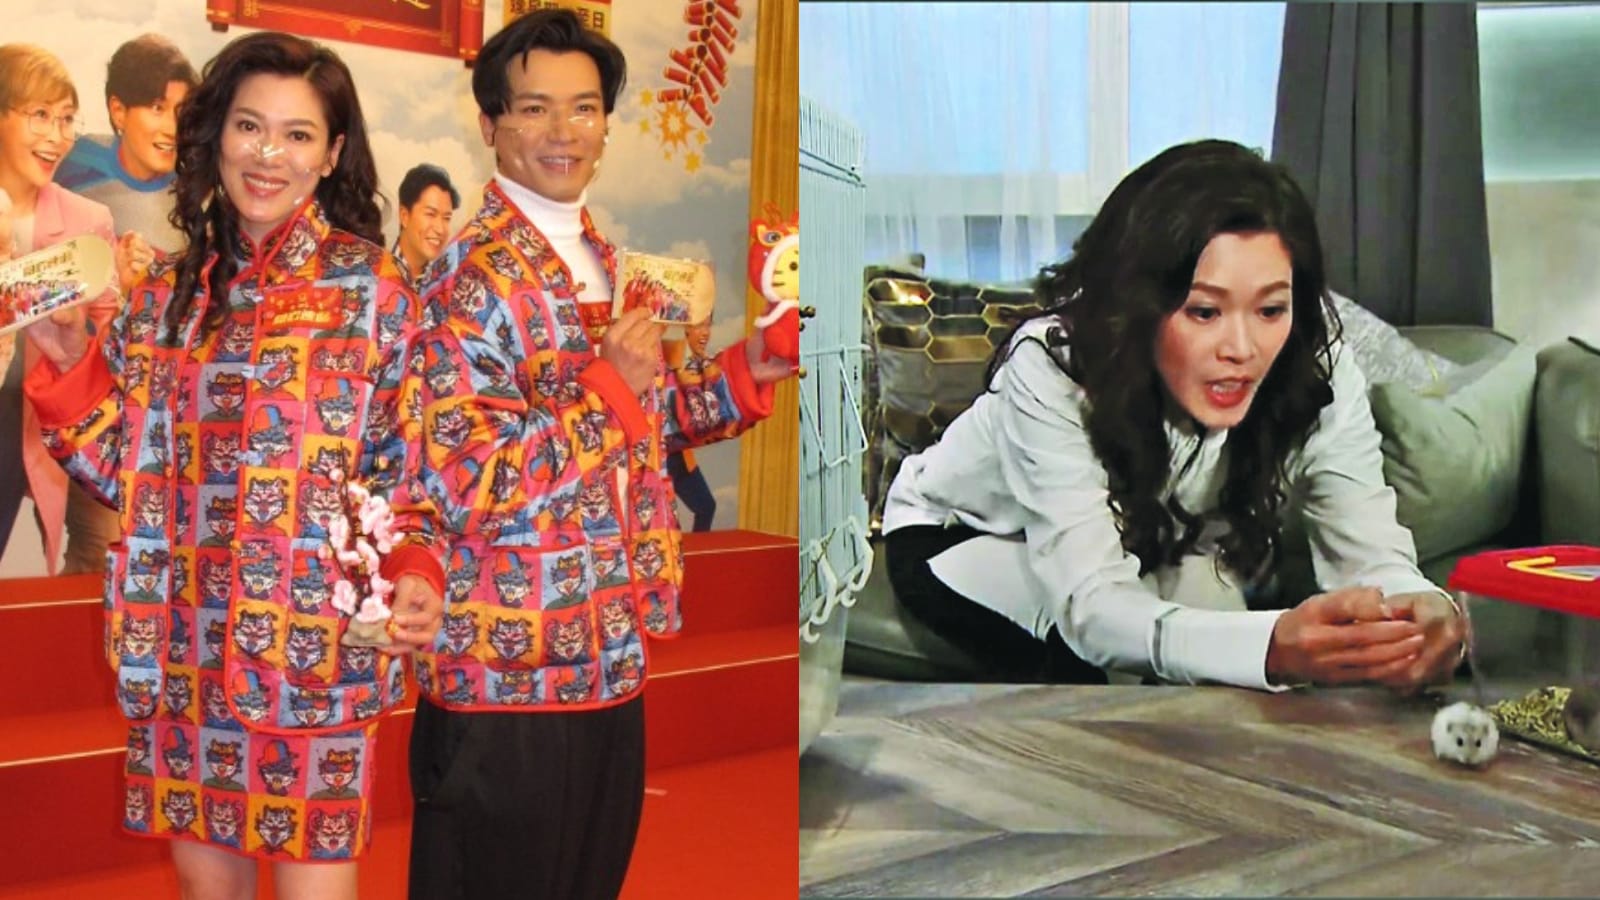 Did TVB Sitcom Come Home Love: Lo And Behold Predict The Future With Its Ep Involving A Hamster?